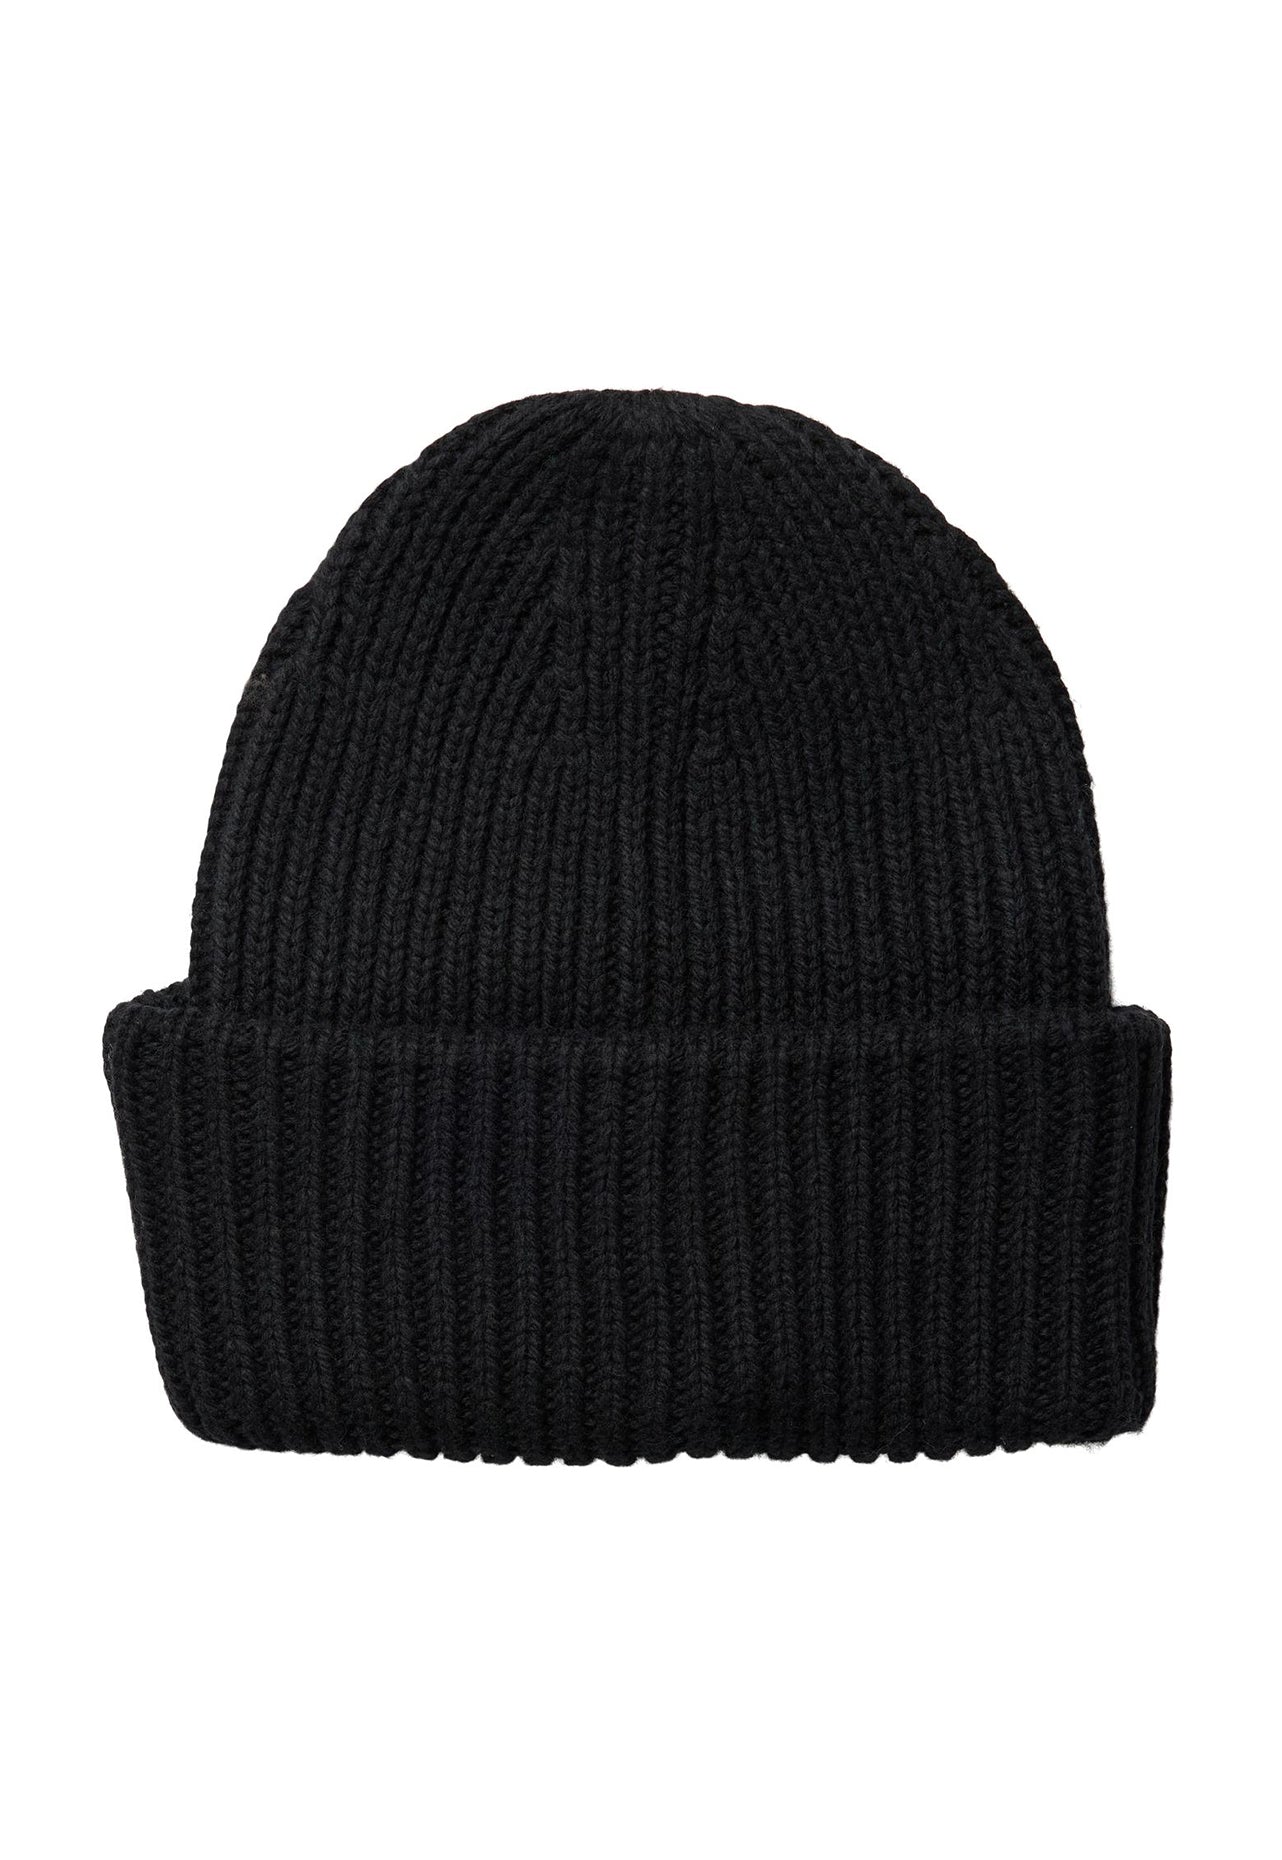 PIECES Juca Fisherman Rib Knit Beanie Hat in Black - One Nation Clothing